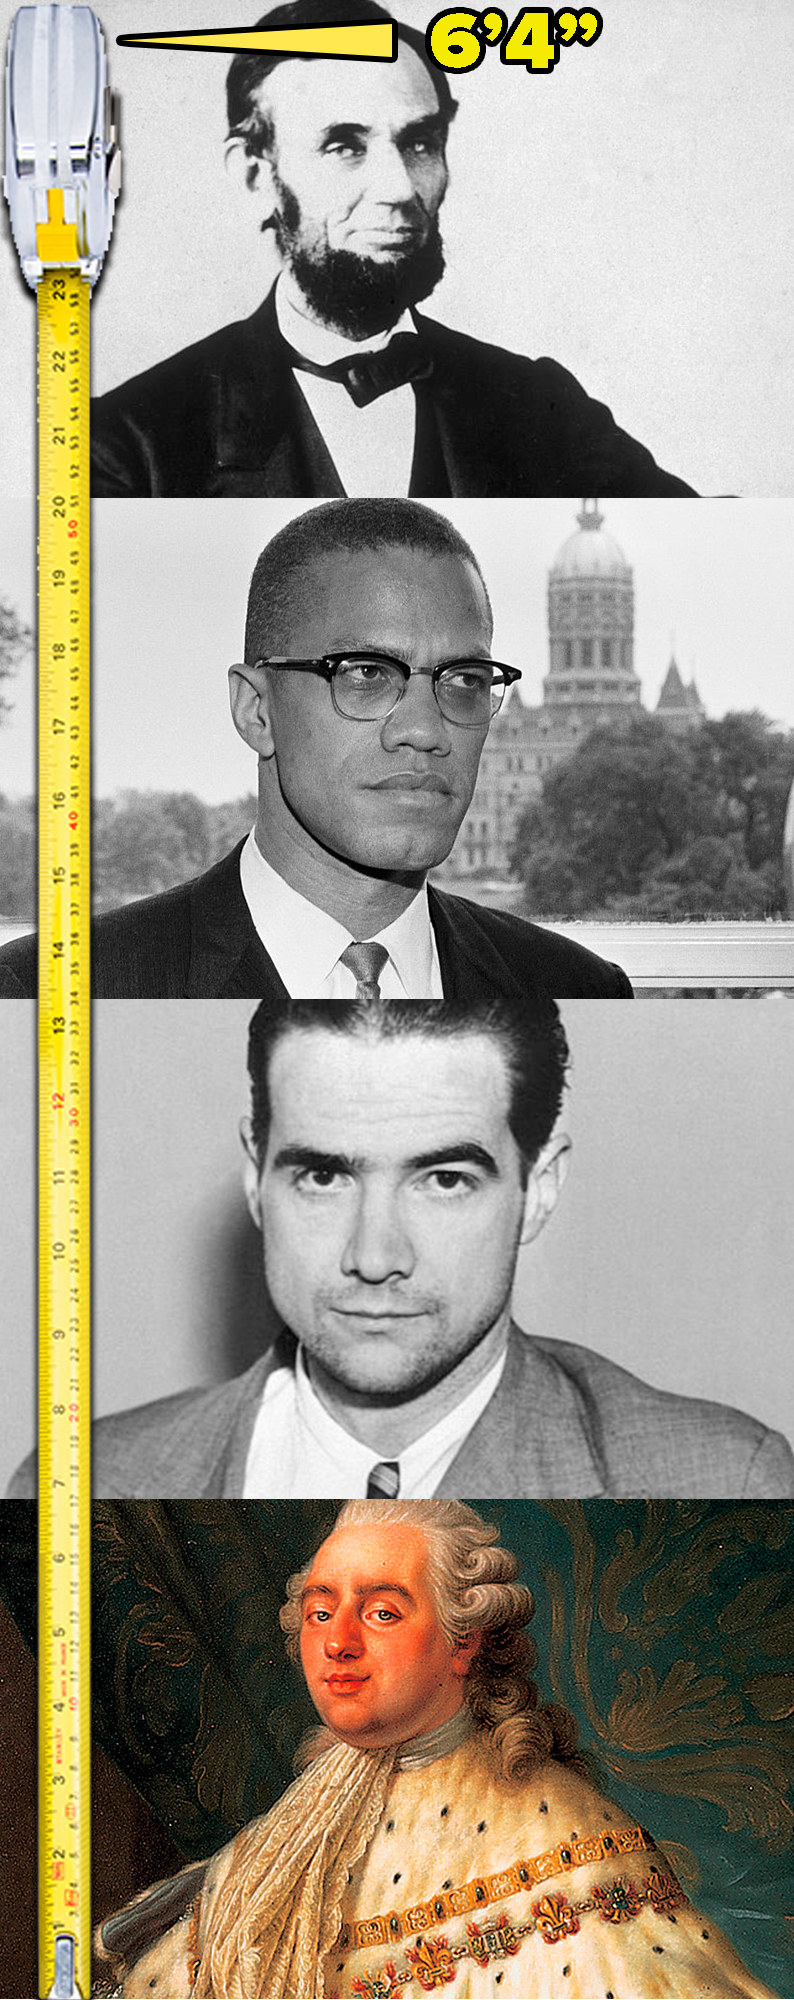 Stacked images of Abraham Lincoln, Malcolm X, Howard Hughes, and Louis the 16th next to a measuring tape